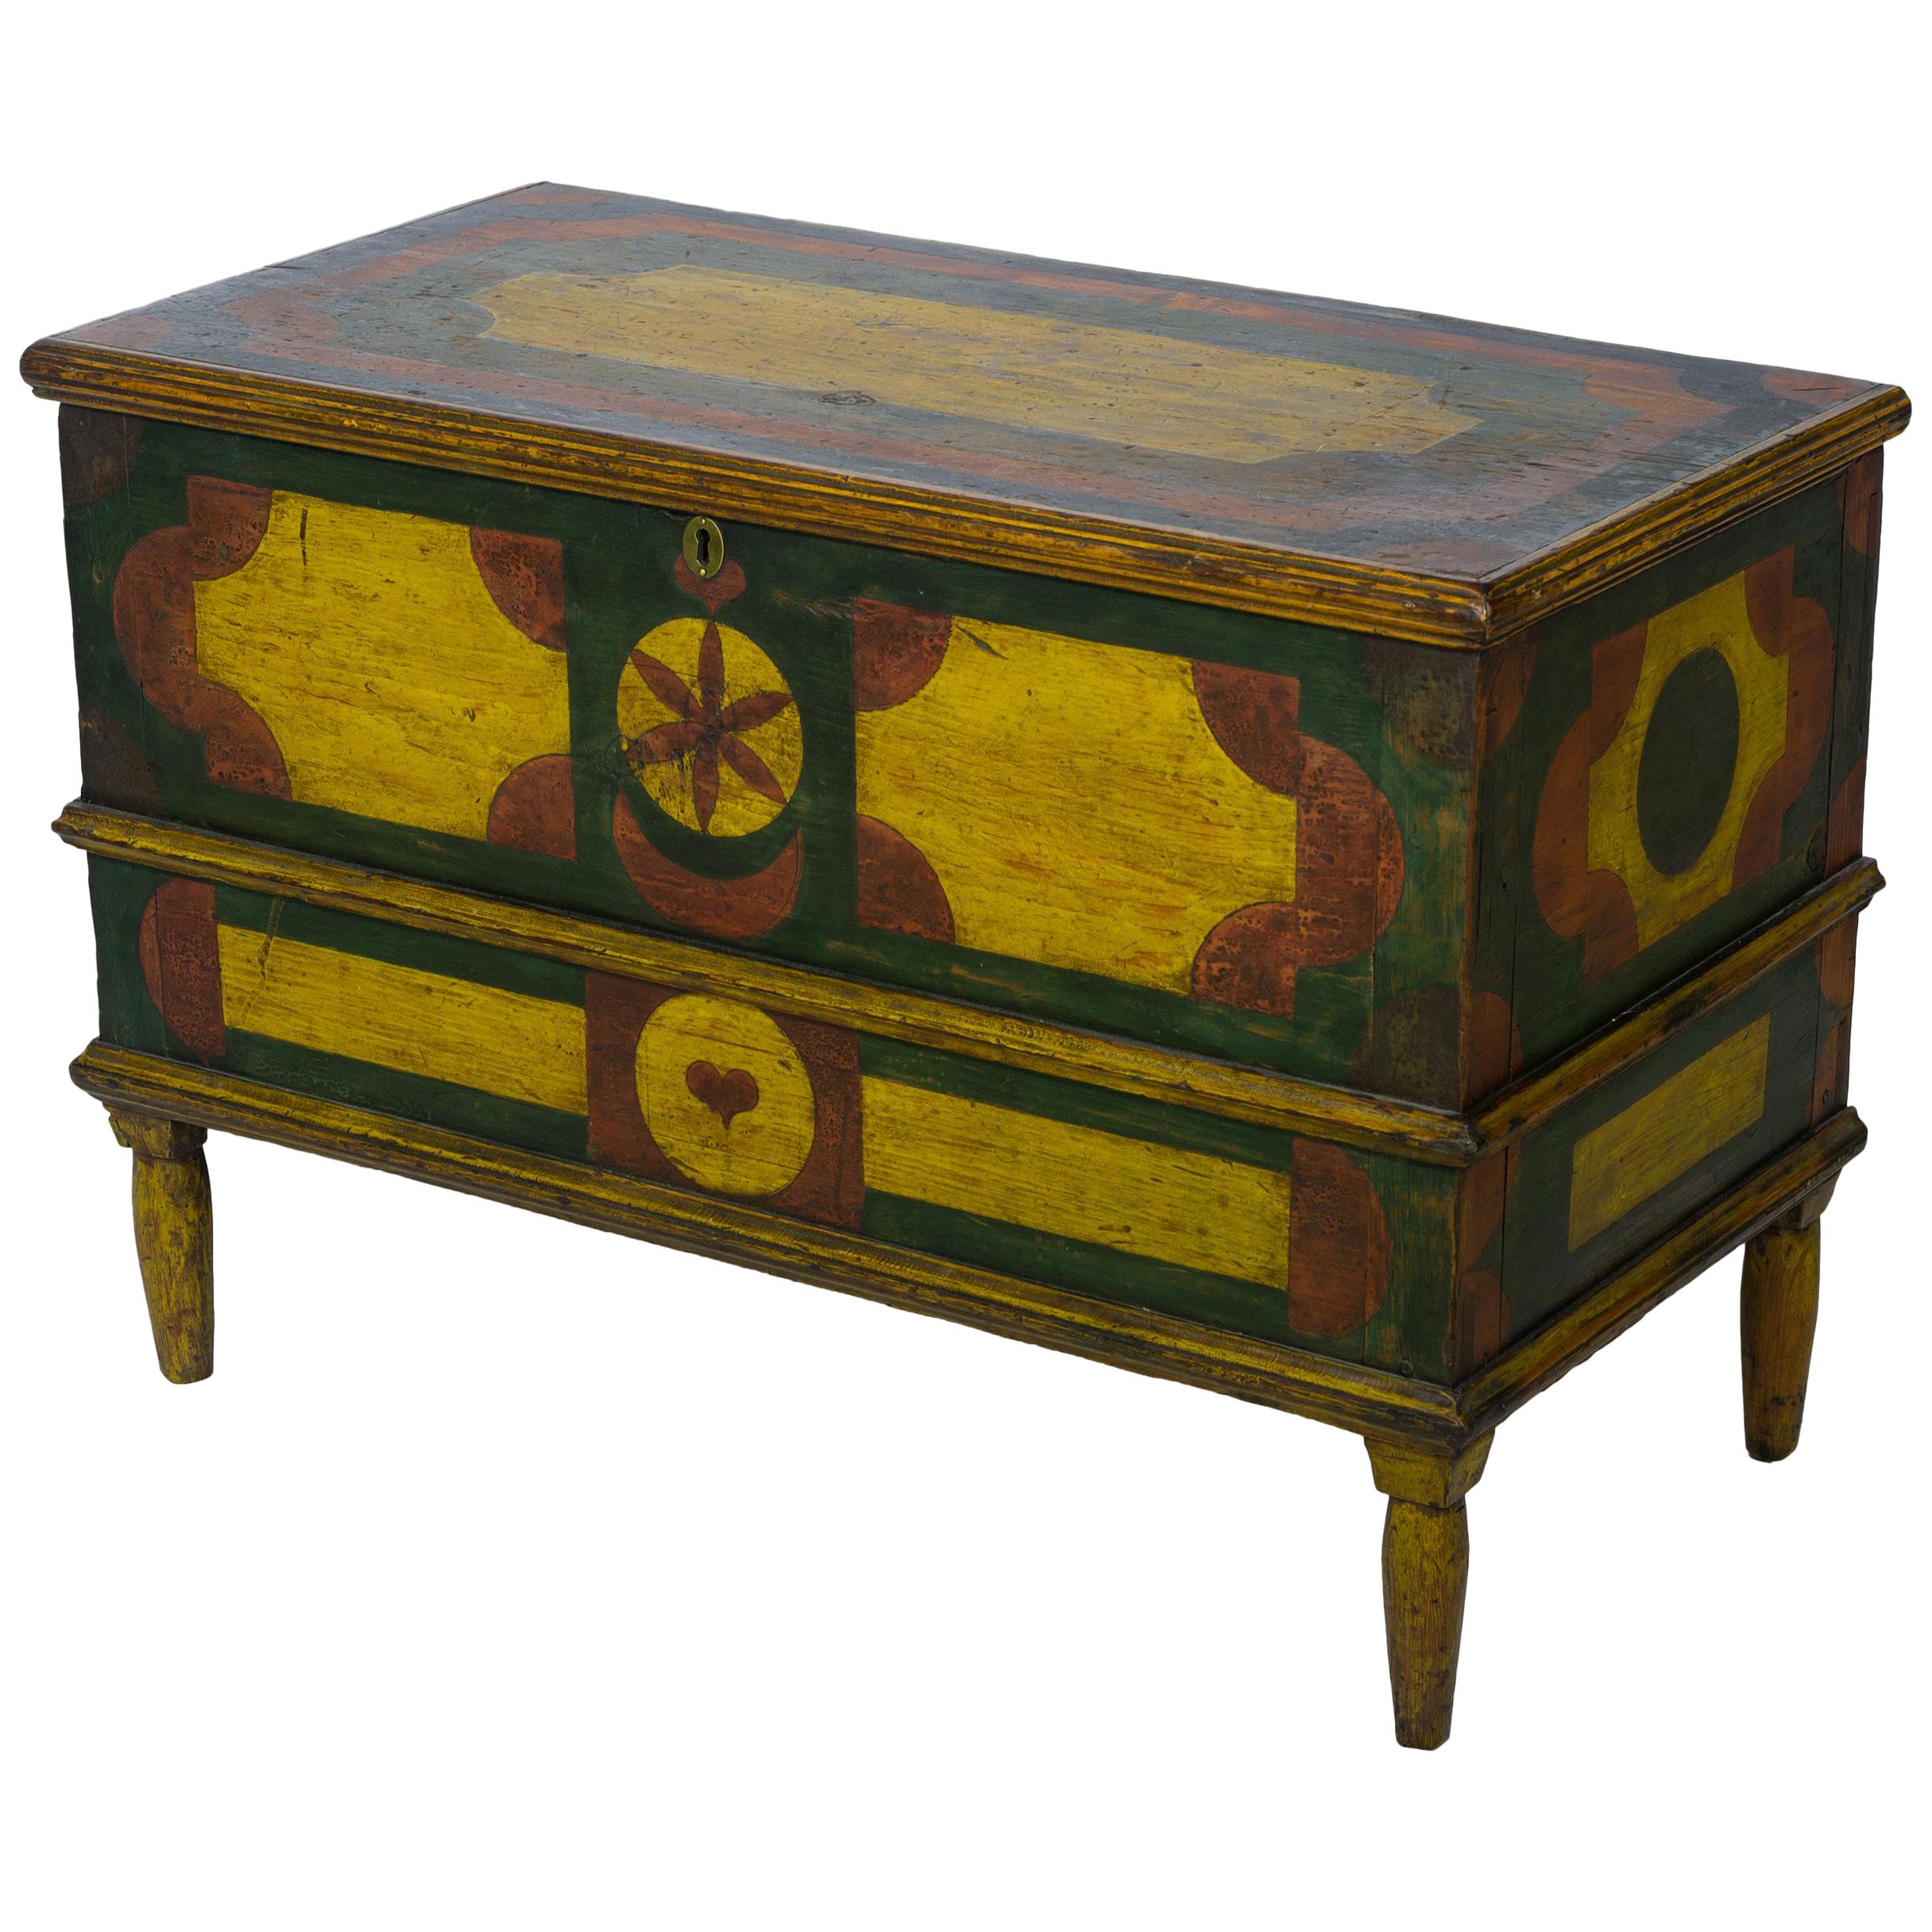 Multicolored Blanket Chest with a Geometric